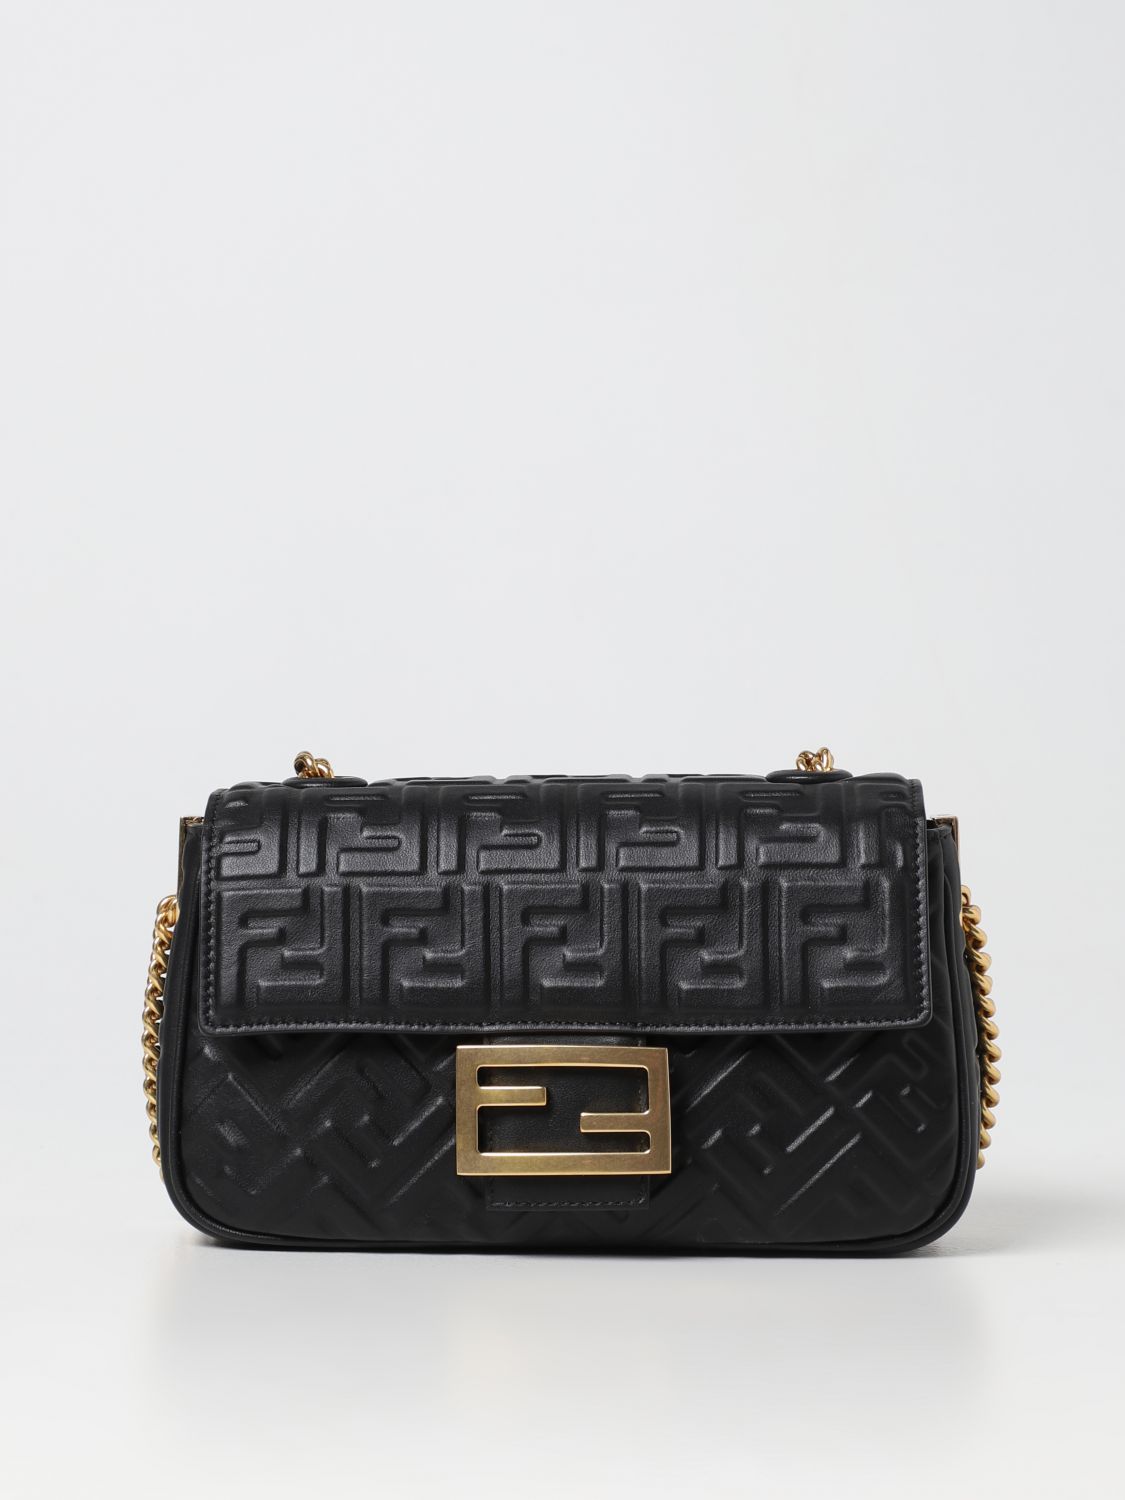 FENDI BAGUETTE BAG IN NAPPA LEATHER WITH EMBOSSED FF MONOGRAM,382208002